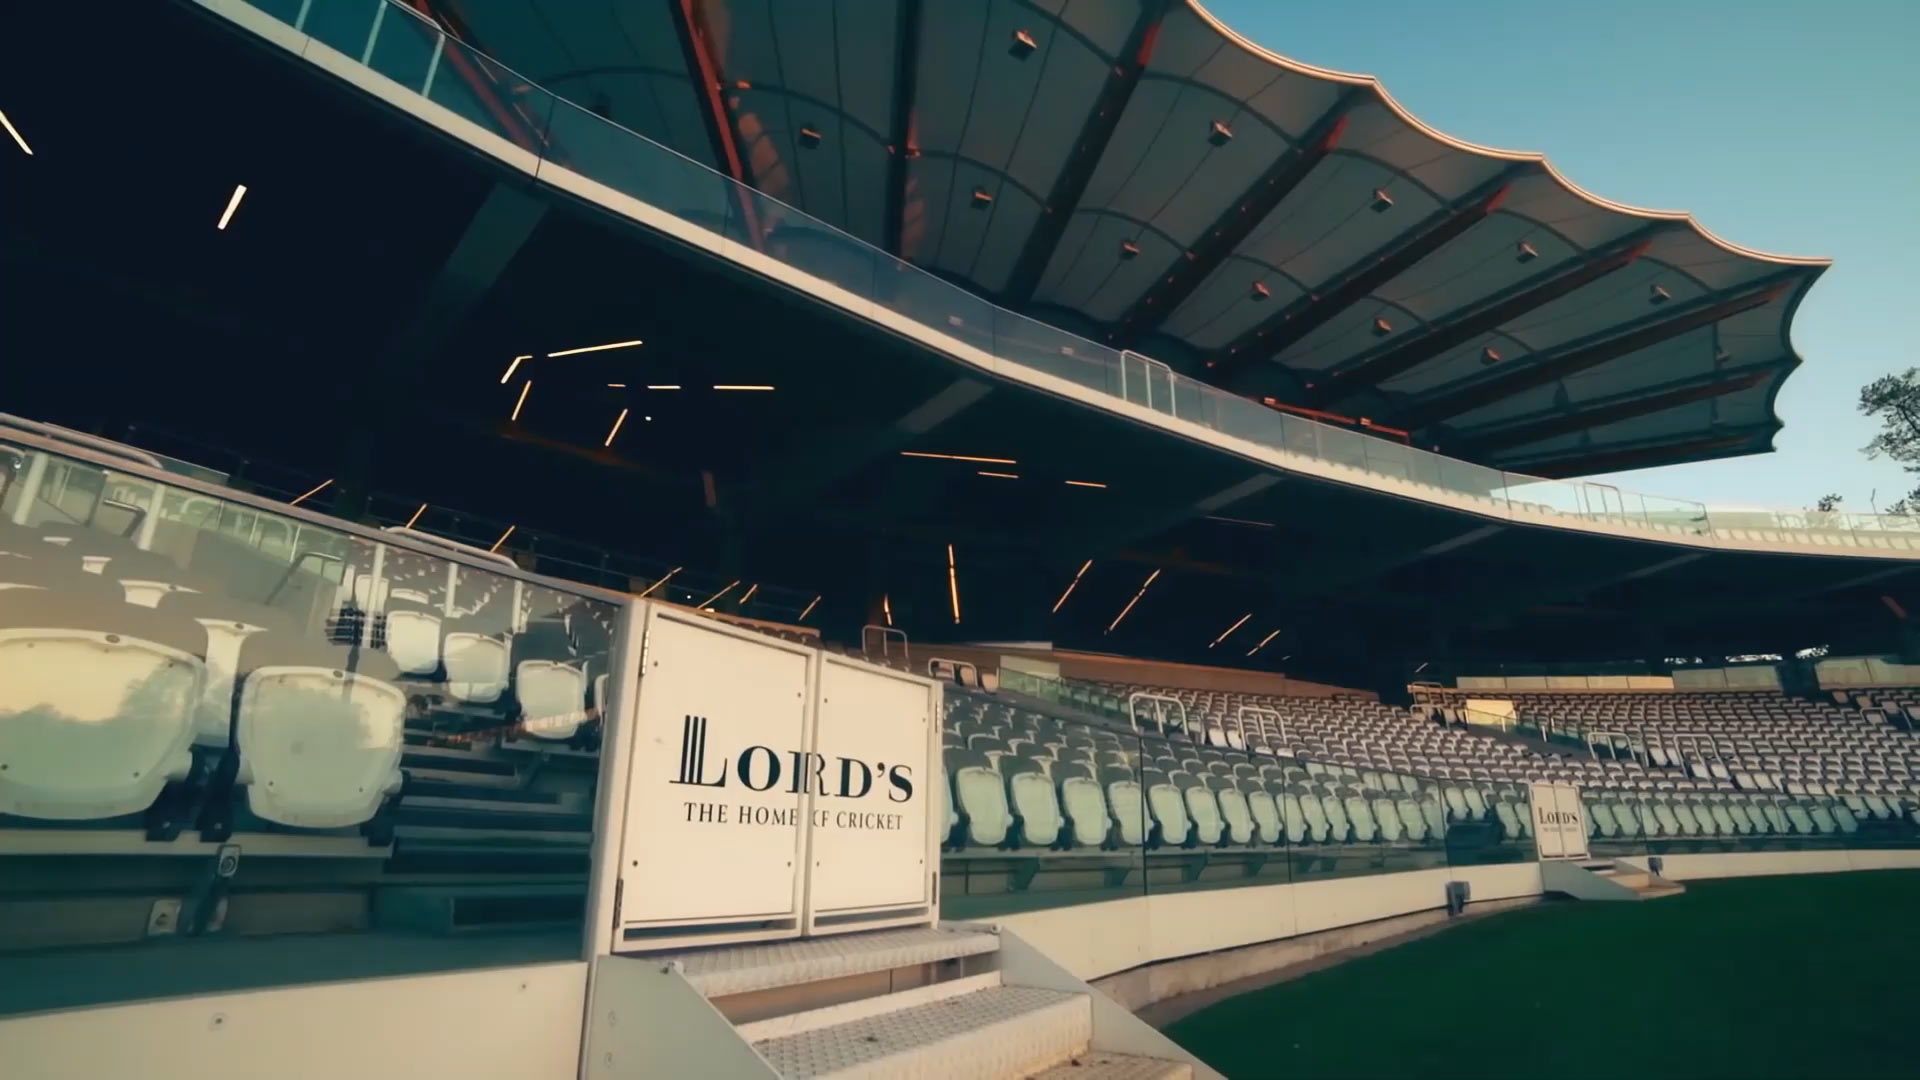 Lords Cricket Ground Outside - 1920x1080 Wallpaper 